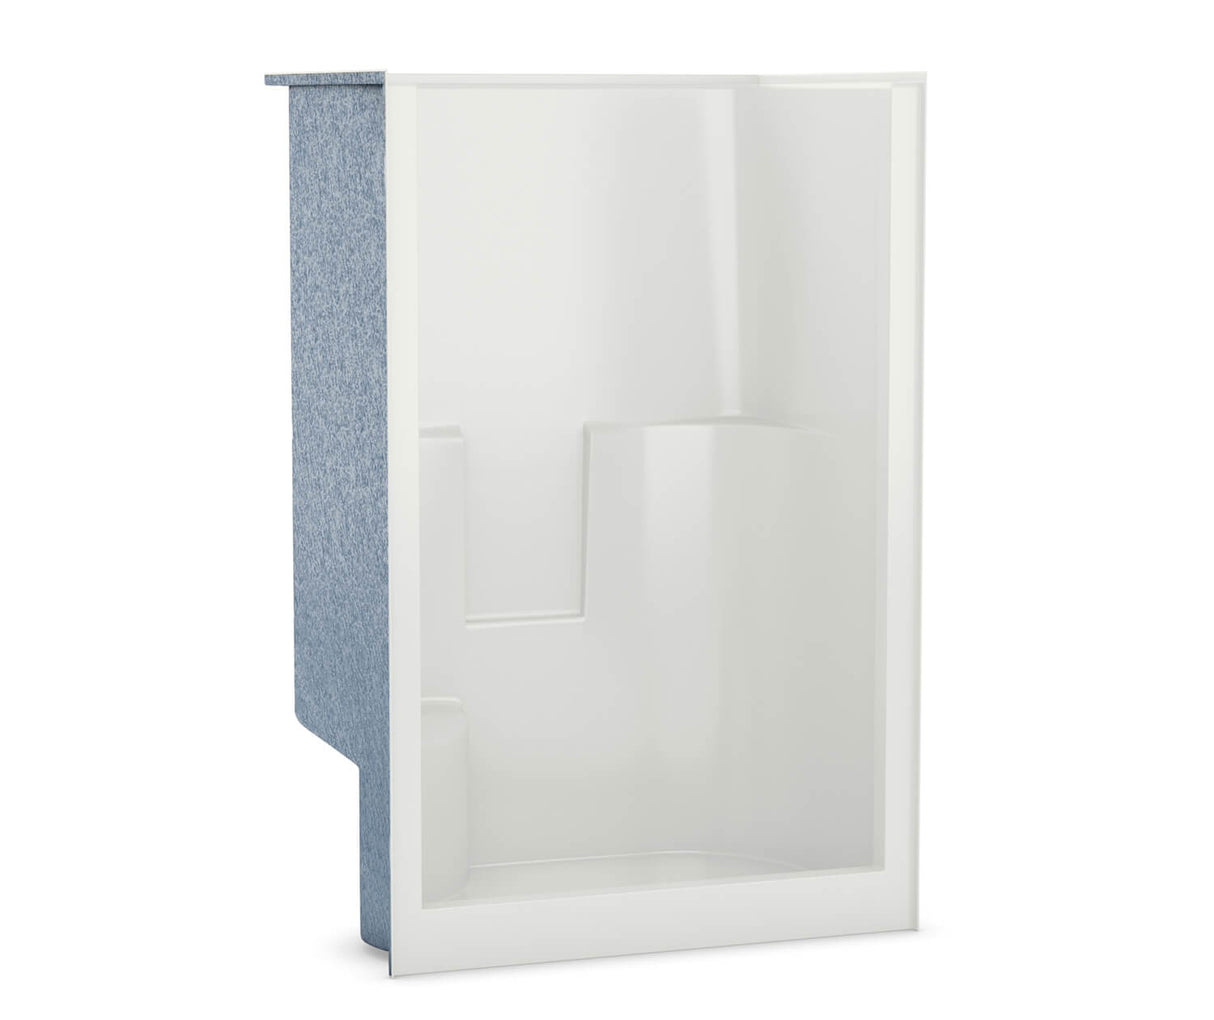 MAAX 140087-000-002-001 SS3648 R/L AcrylX Alcove Center Drain One-Piece Shower in White